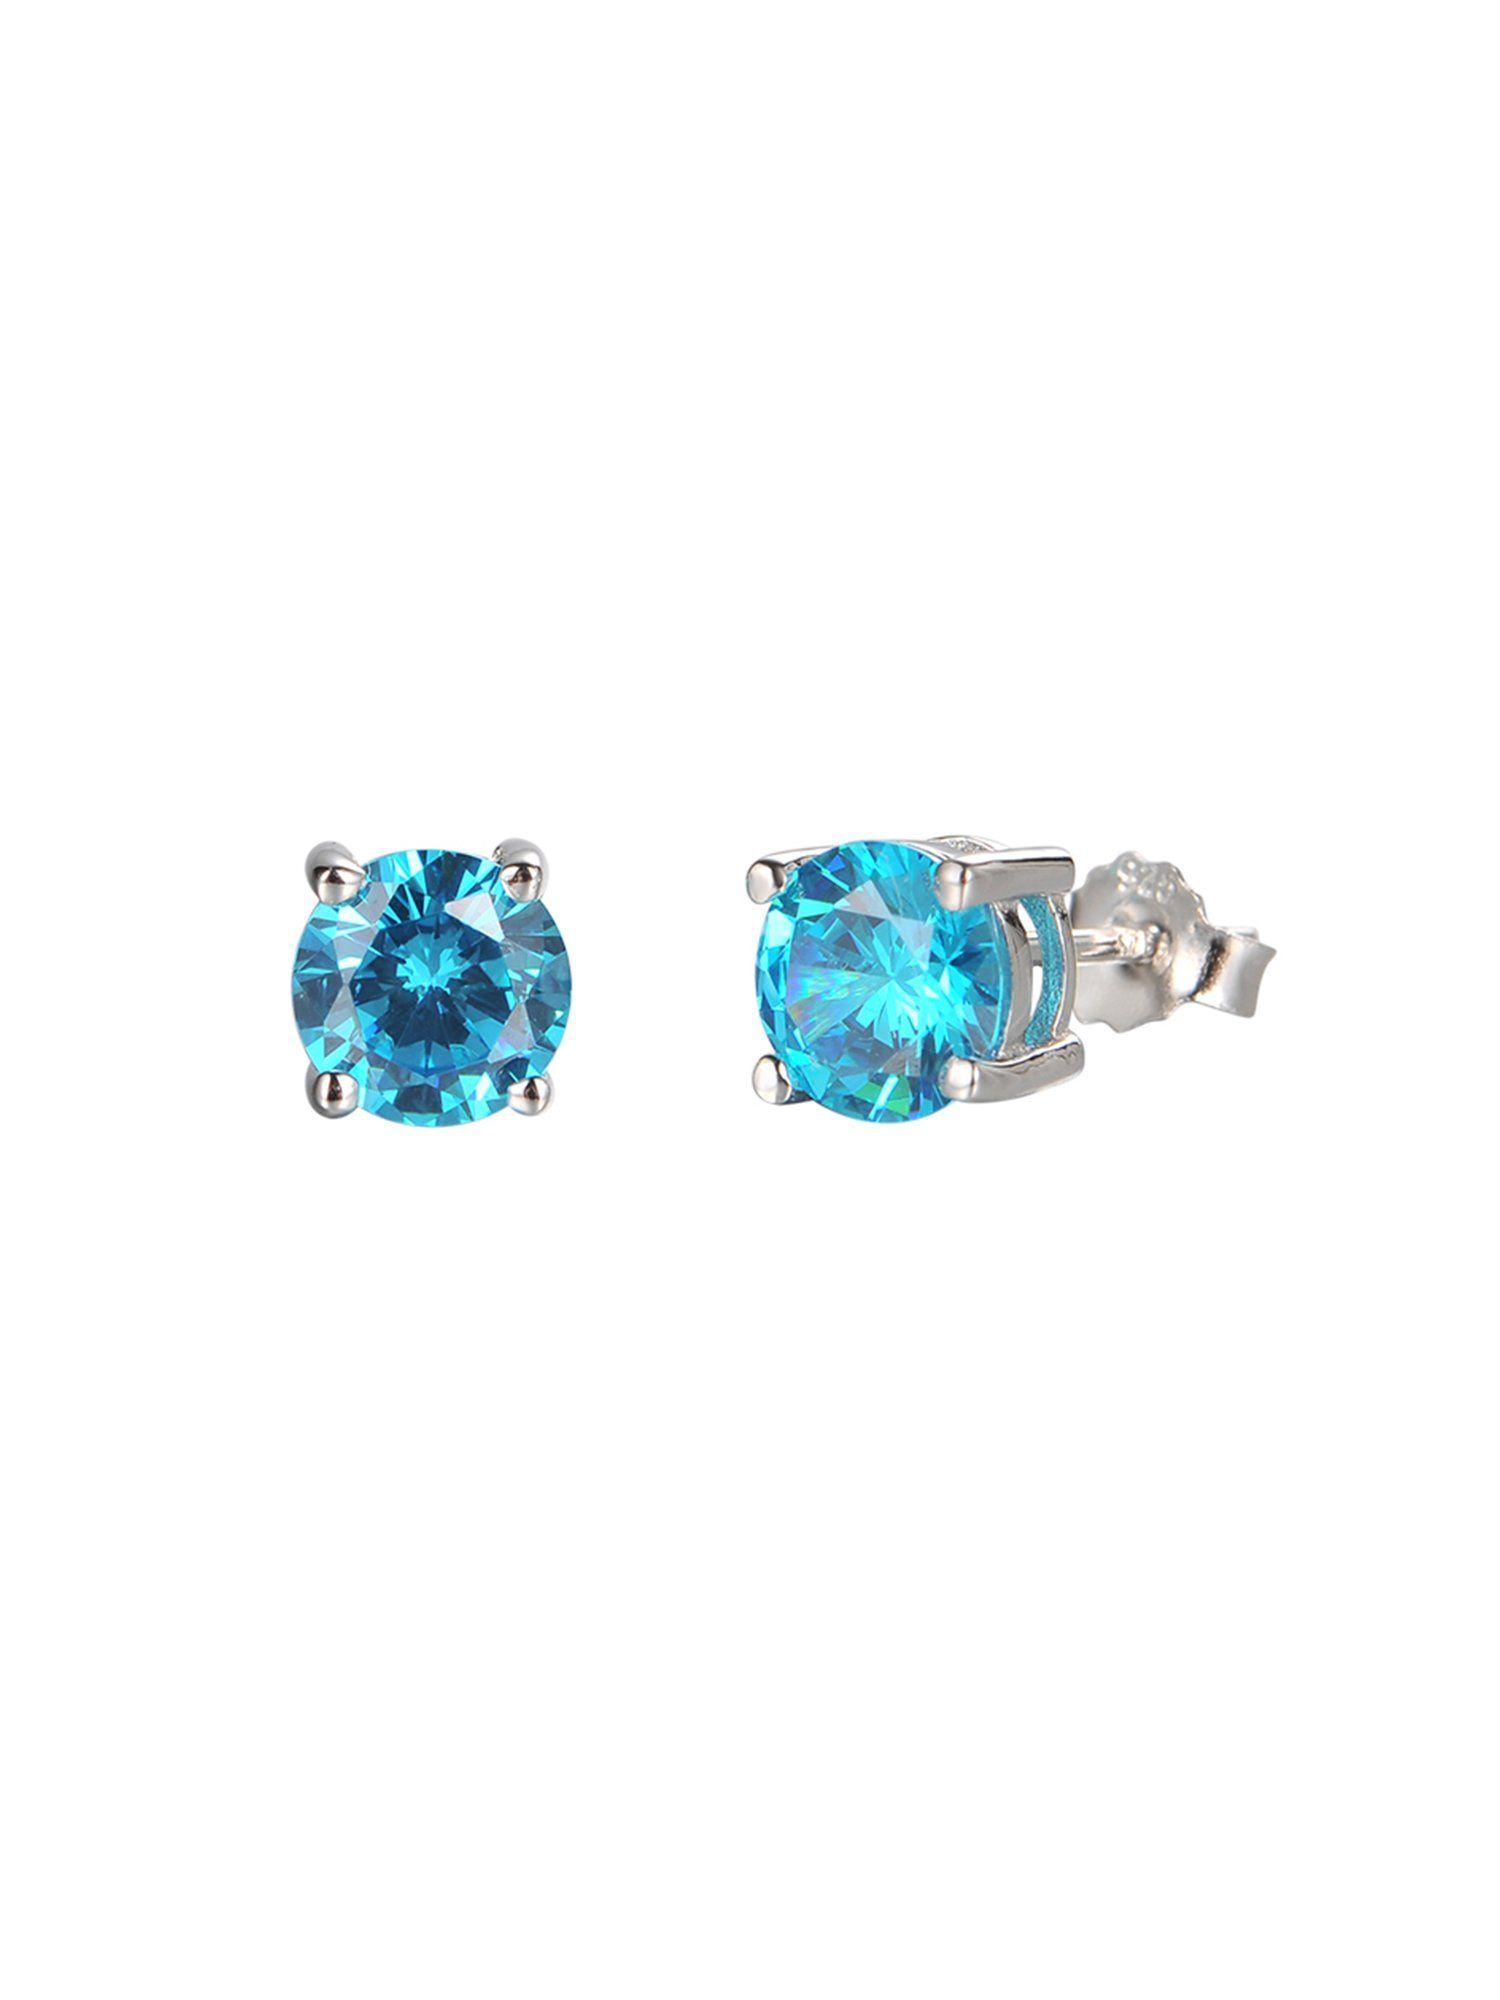 pure 925 sterling silver created topaz solitaire stud earrings for women and girls